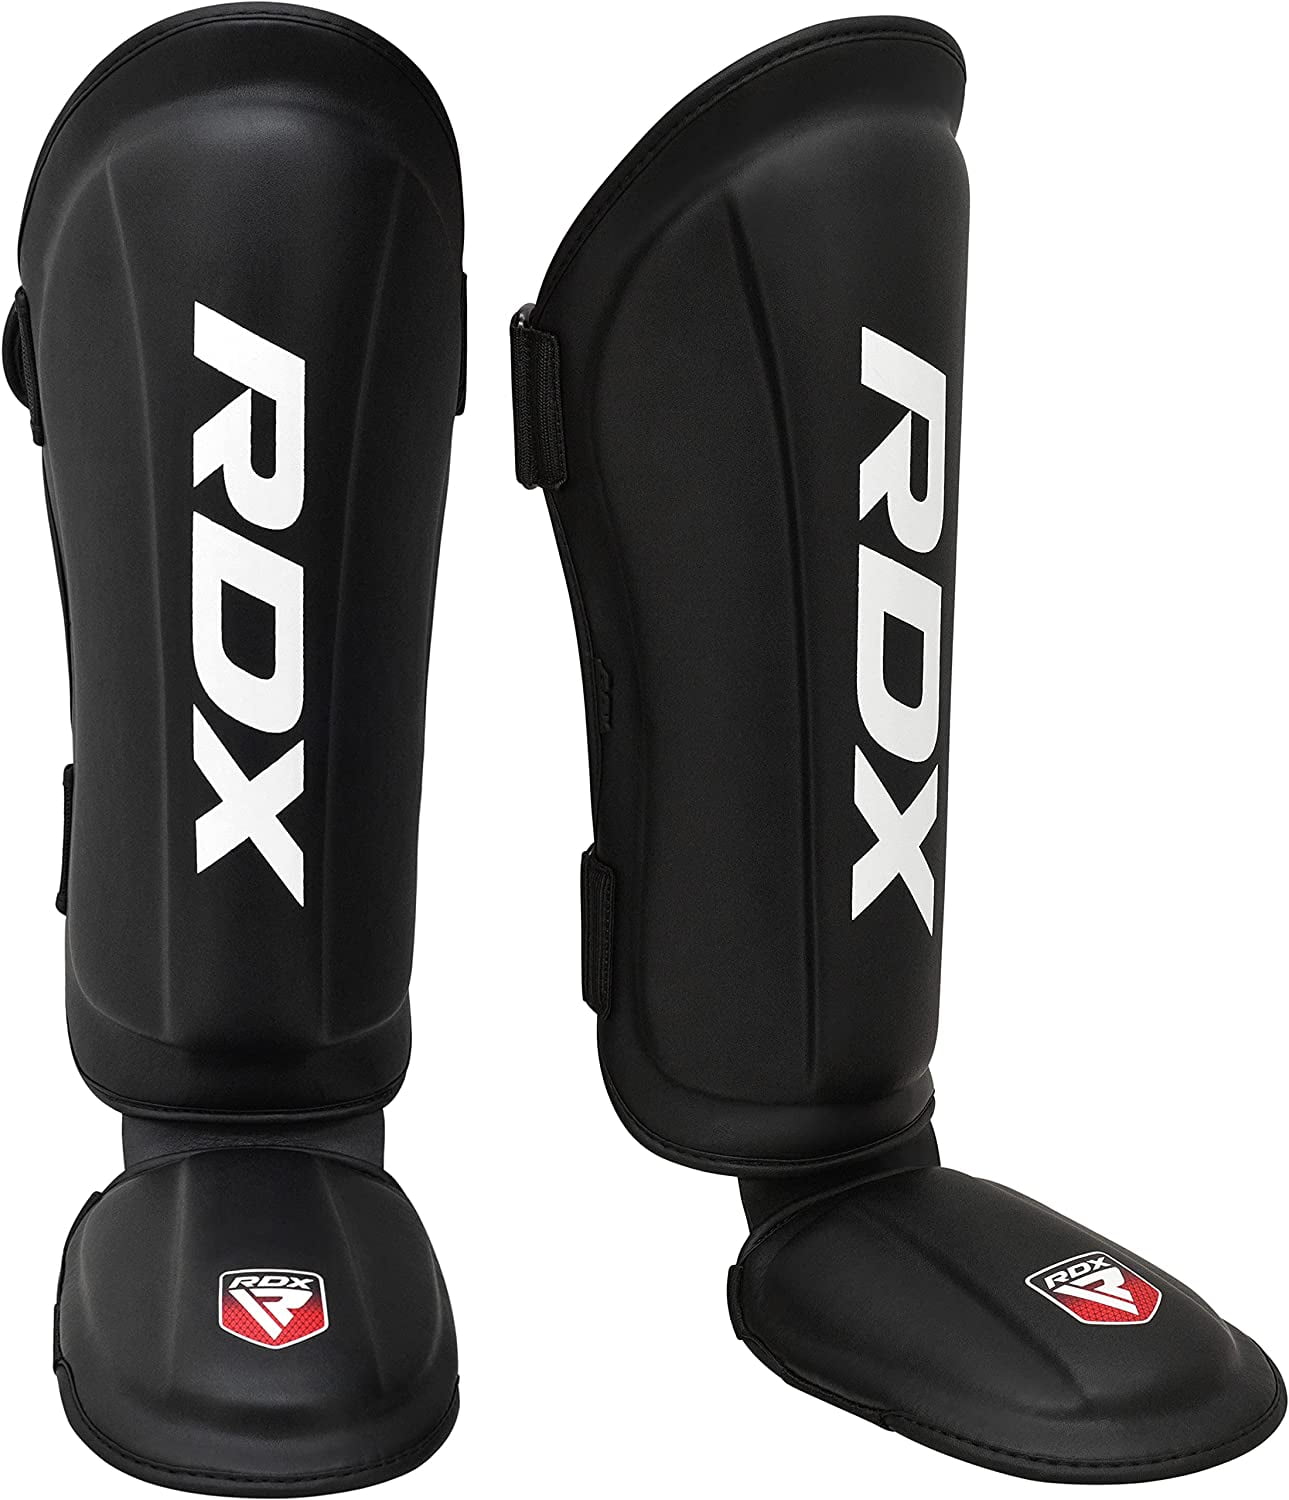 Protective Gear for Boxing MMA Sparring Martial Arts BJJ Leather Instep Leg Protector Foam Pads LangRay Shin Guards Muay Thai Kickboxing 